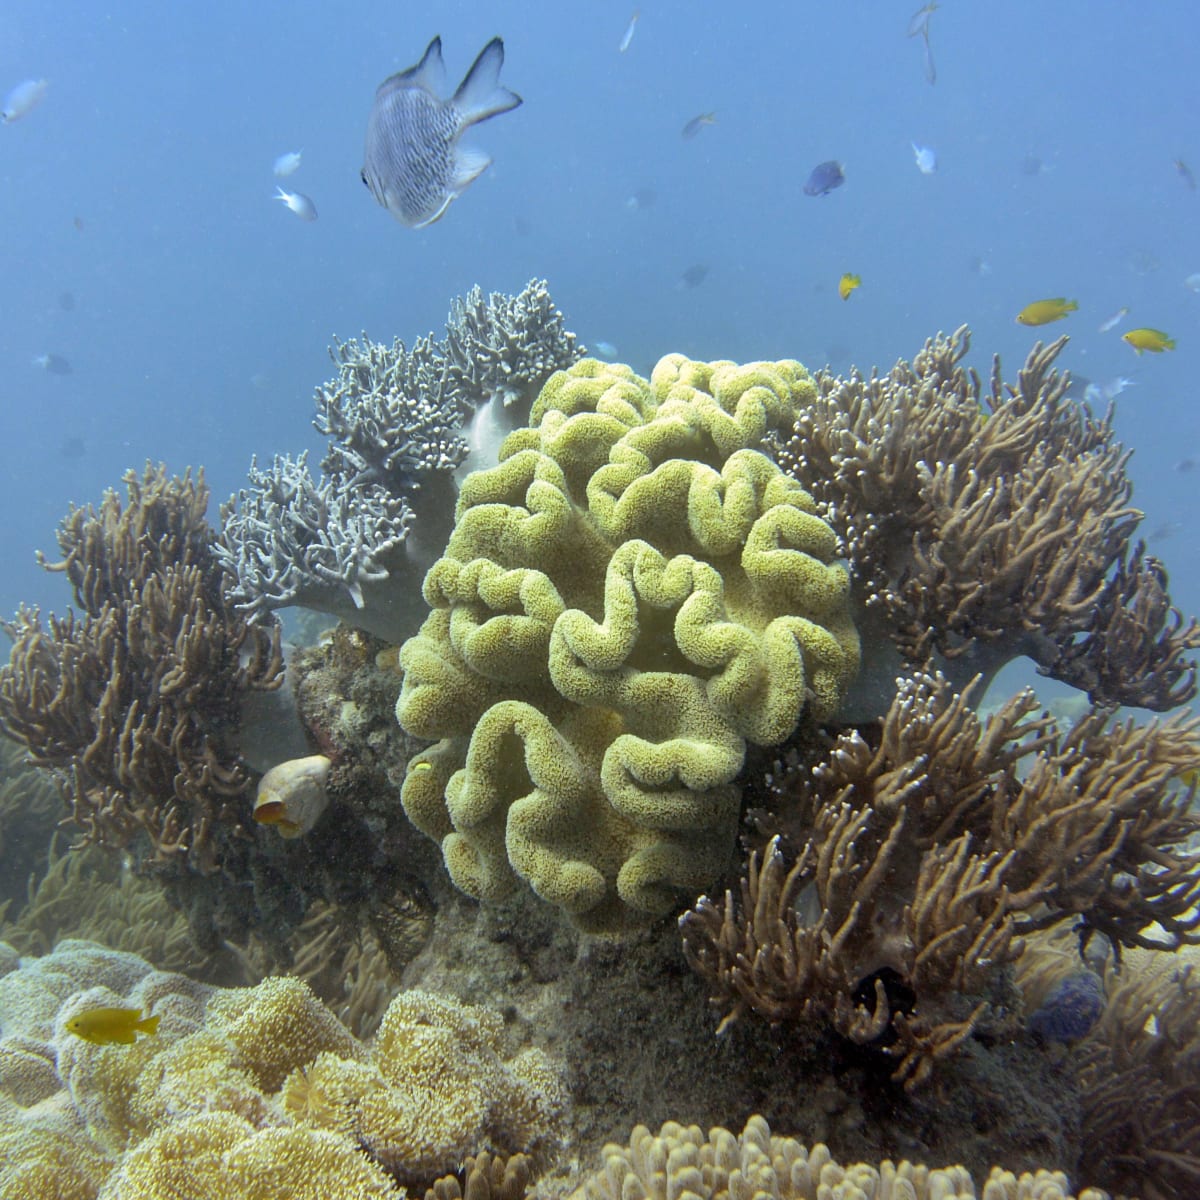 Plastic pollution on the world's coral reefs